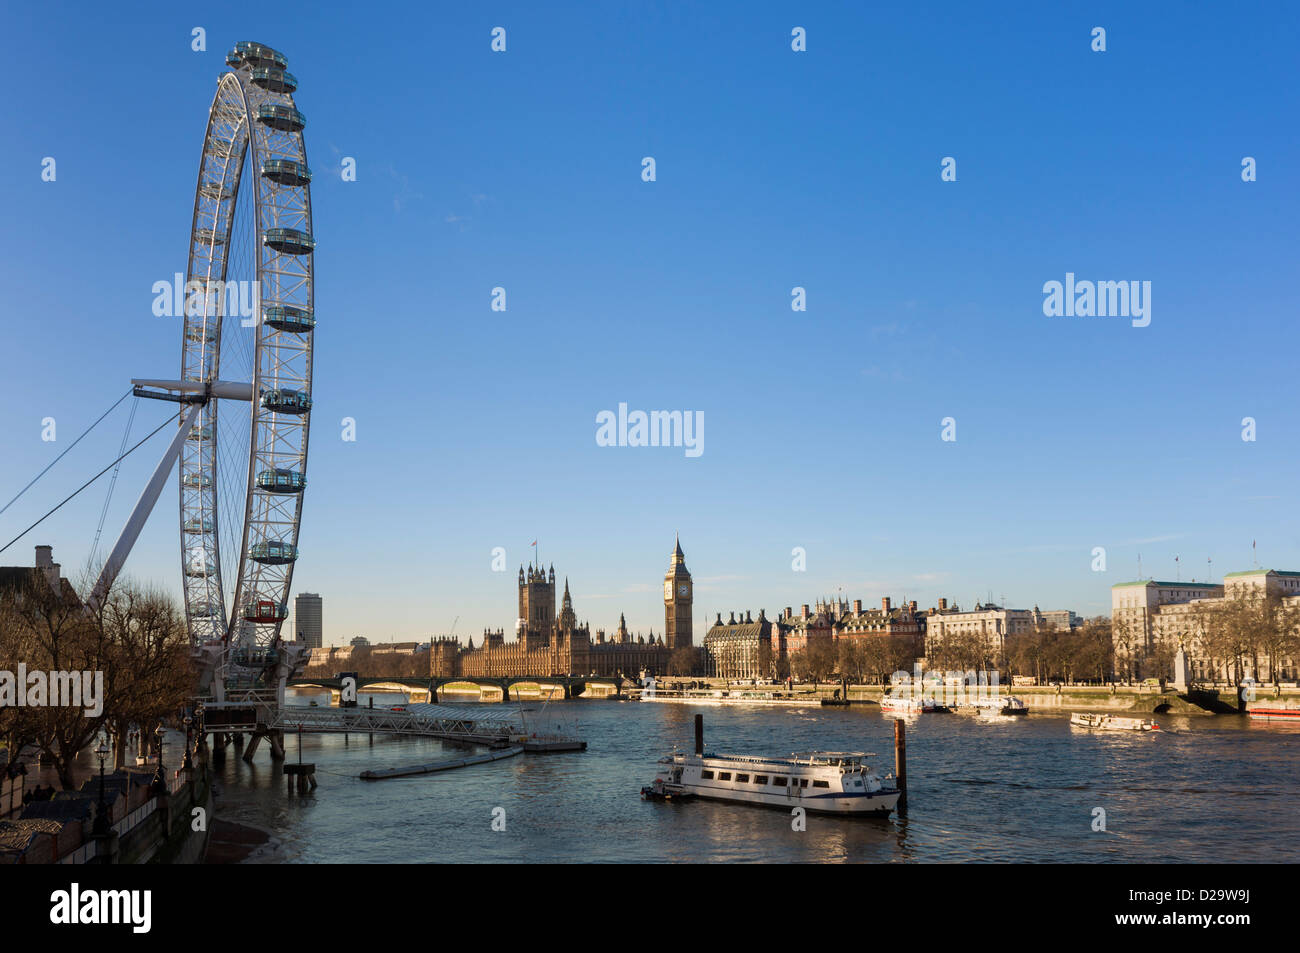 View of River Thames with the London Eye and Houses of Parliament from Hungerford Bridge, London, England, UK Stock Photo